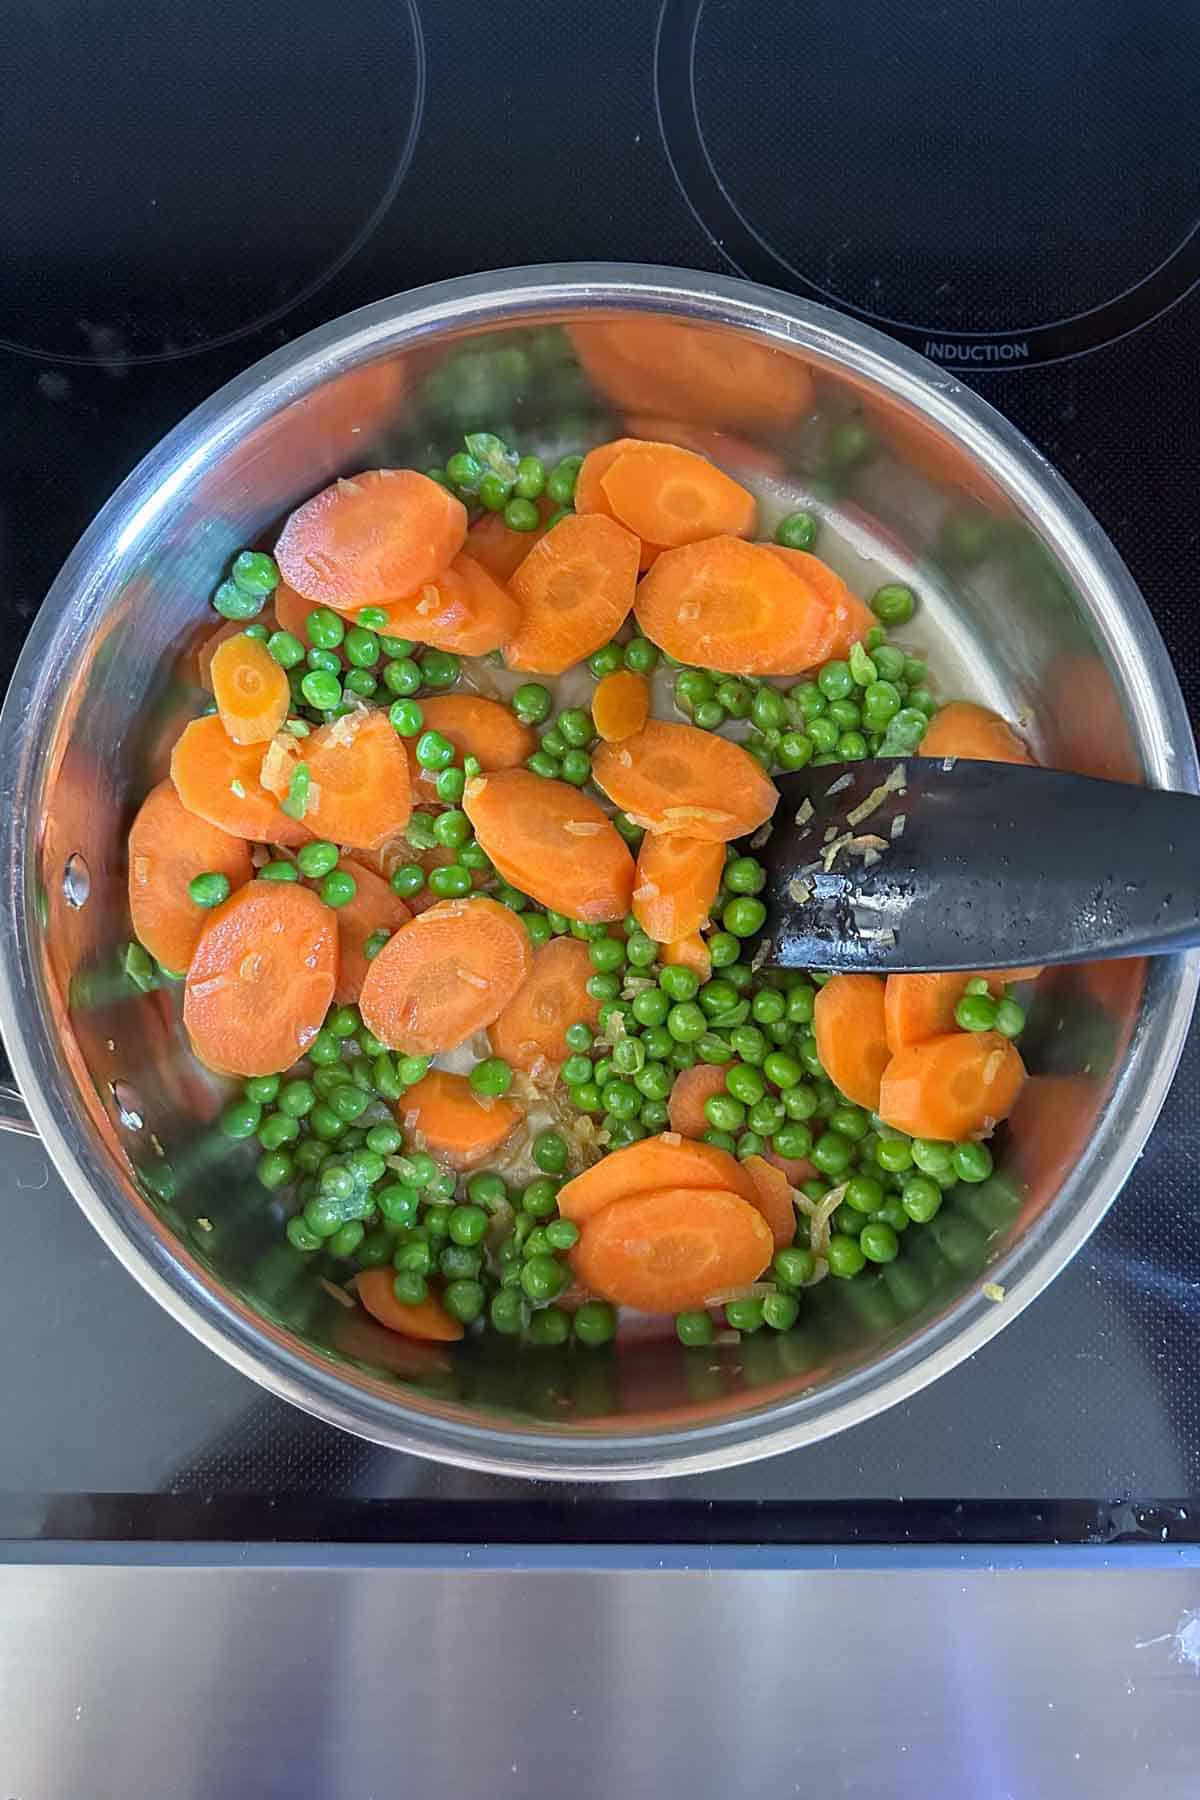 Sliced carrots and peas cooking in a stainless steel pot on an induction stove.